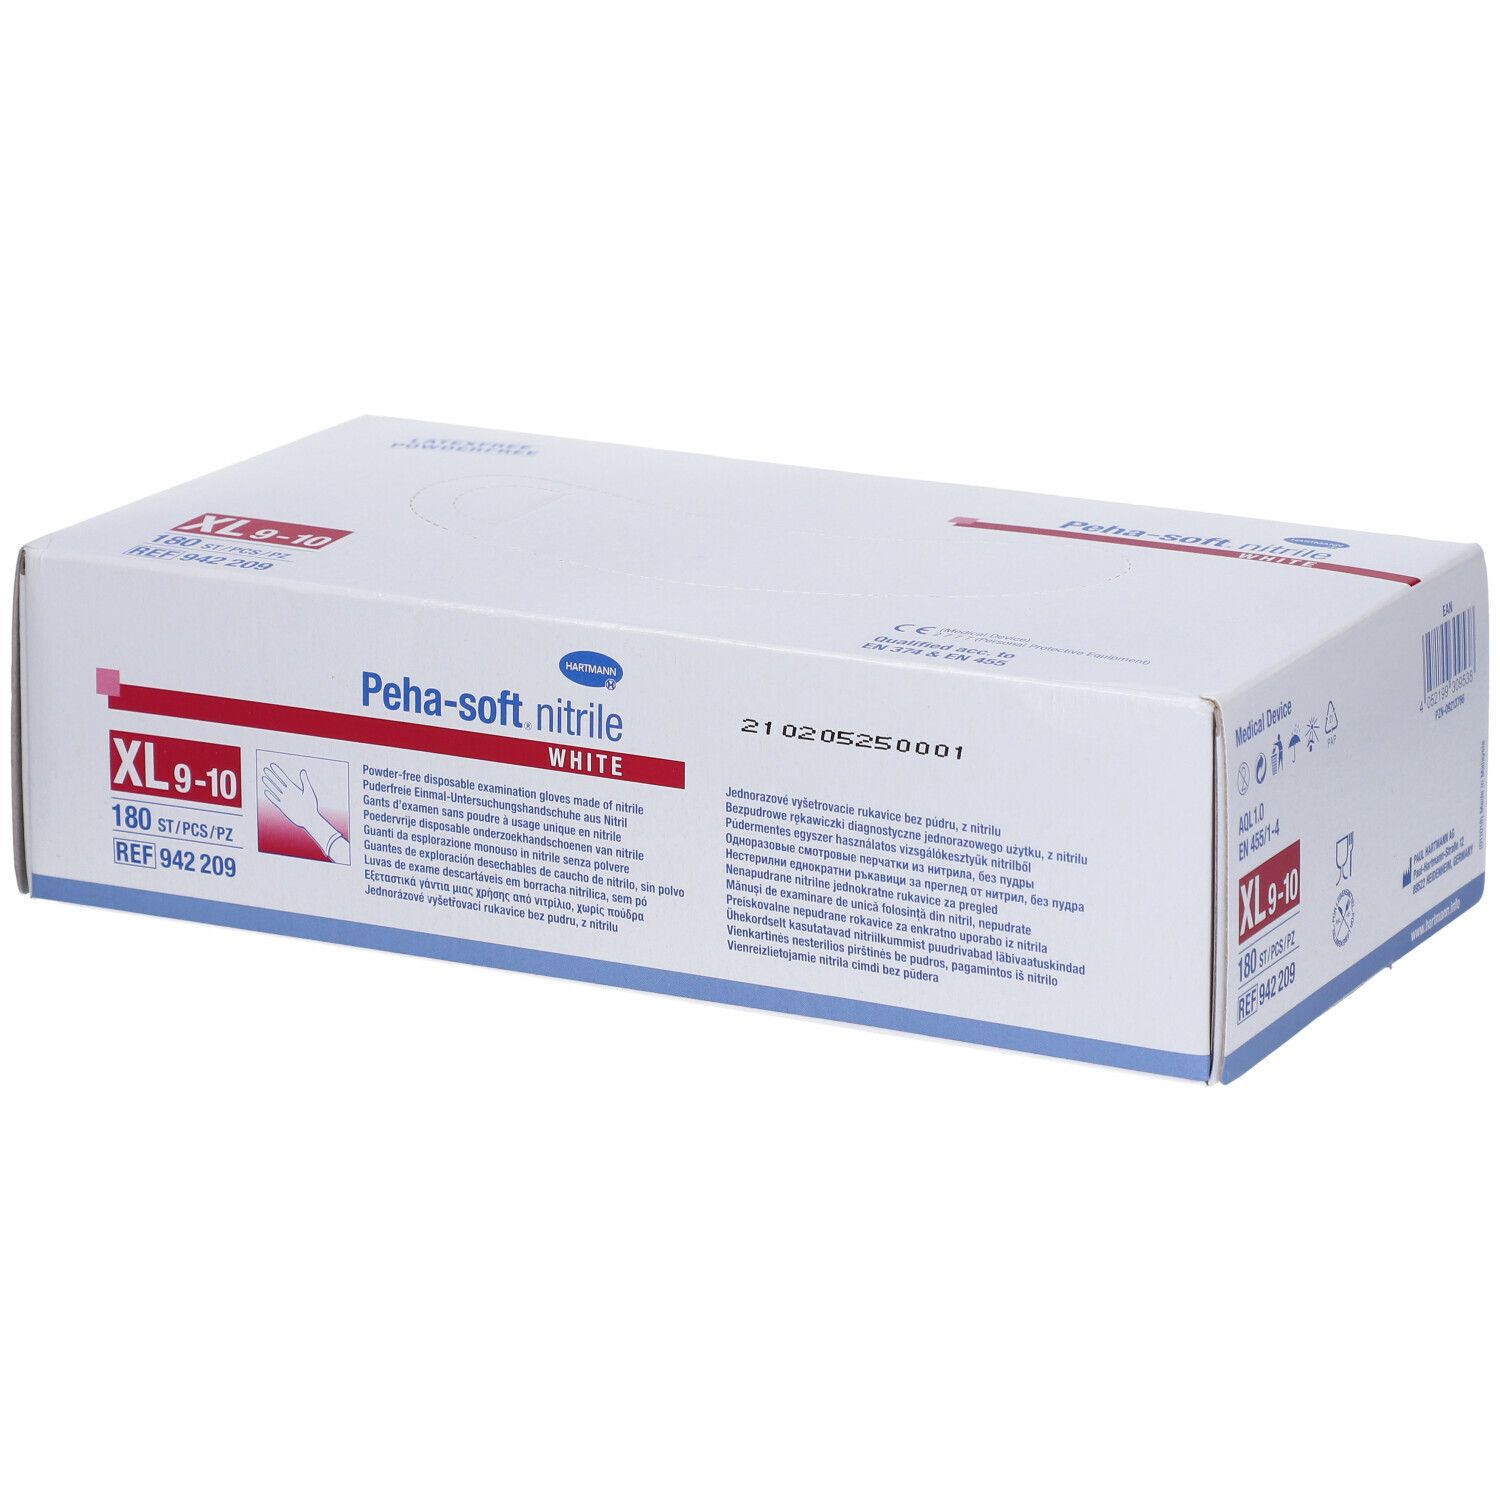 Image of Peha-soft® nitrile white puderfrei unsteril Untersuchungshandschuhe Gr. XL 9-10